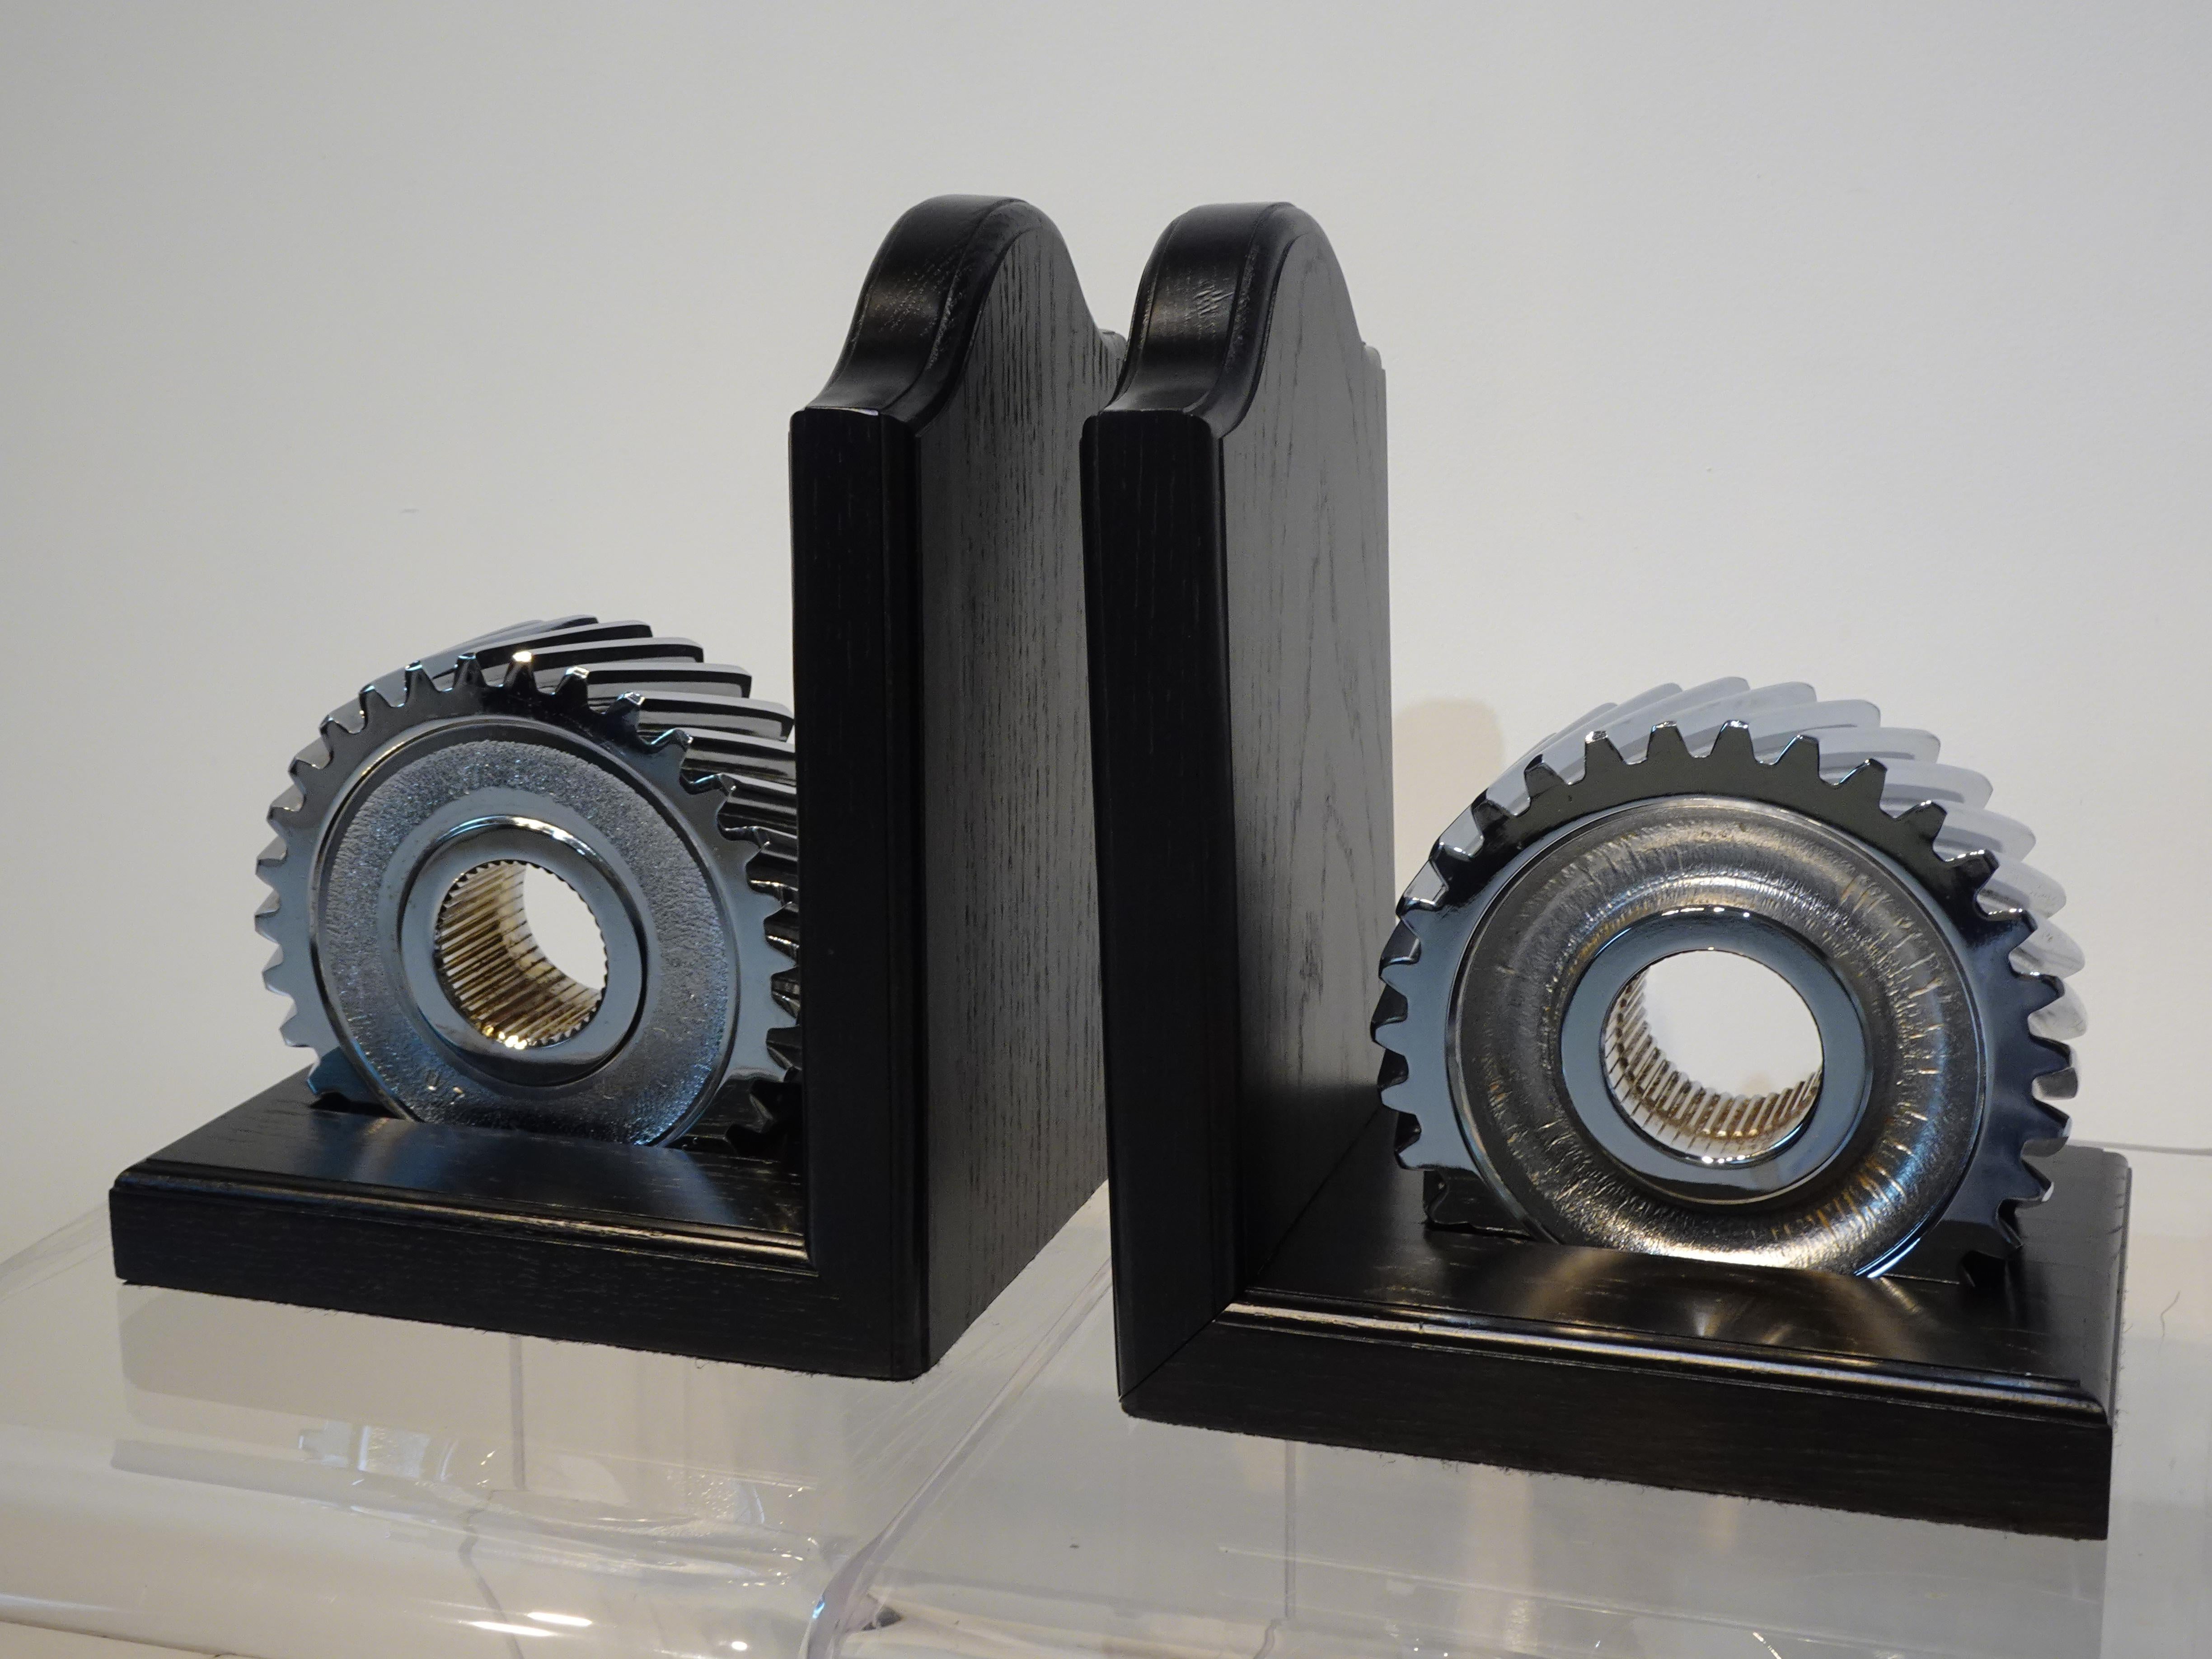 American Chromed Industrial Gear / Wood Bookends